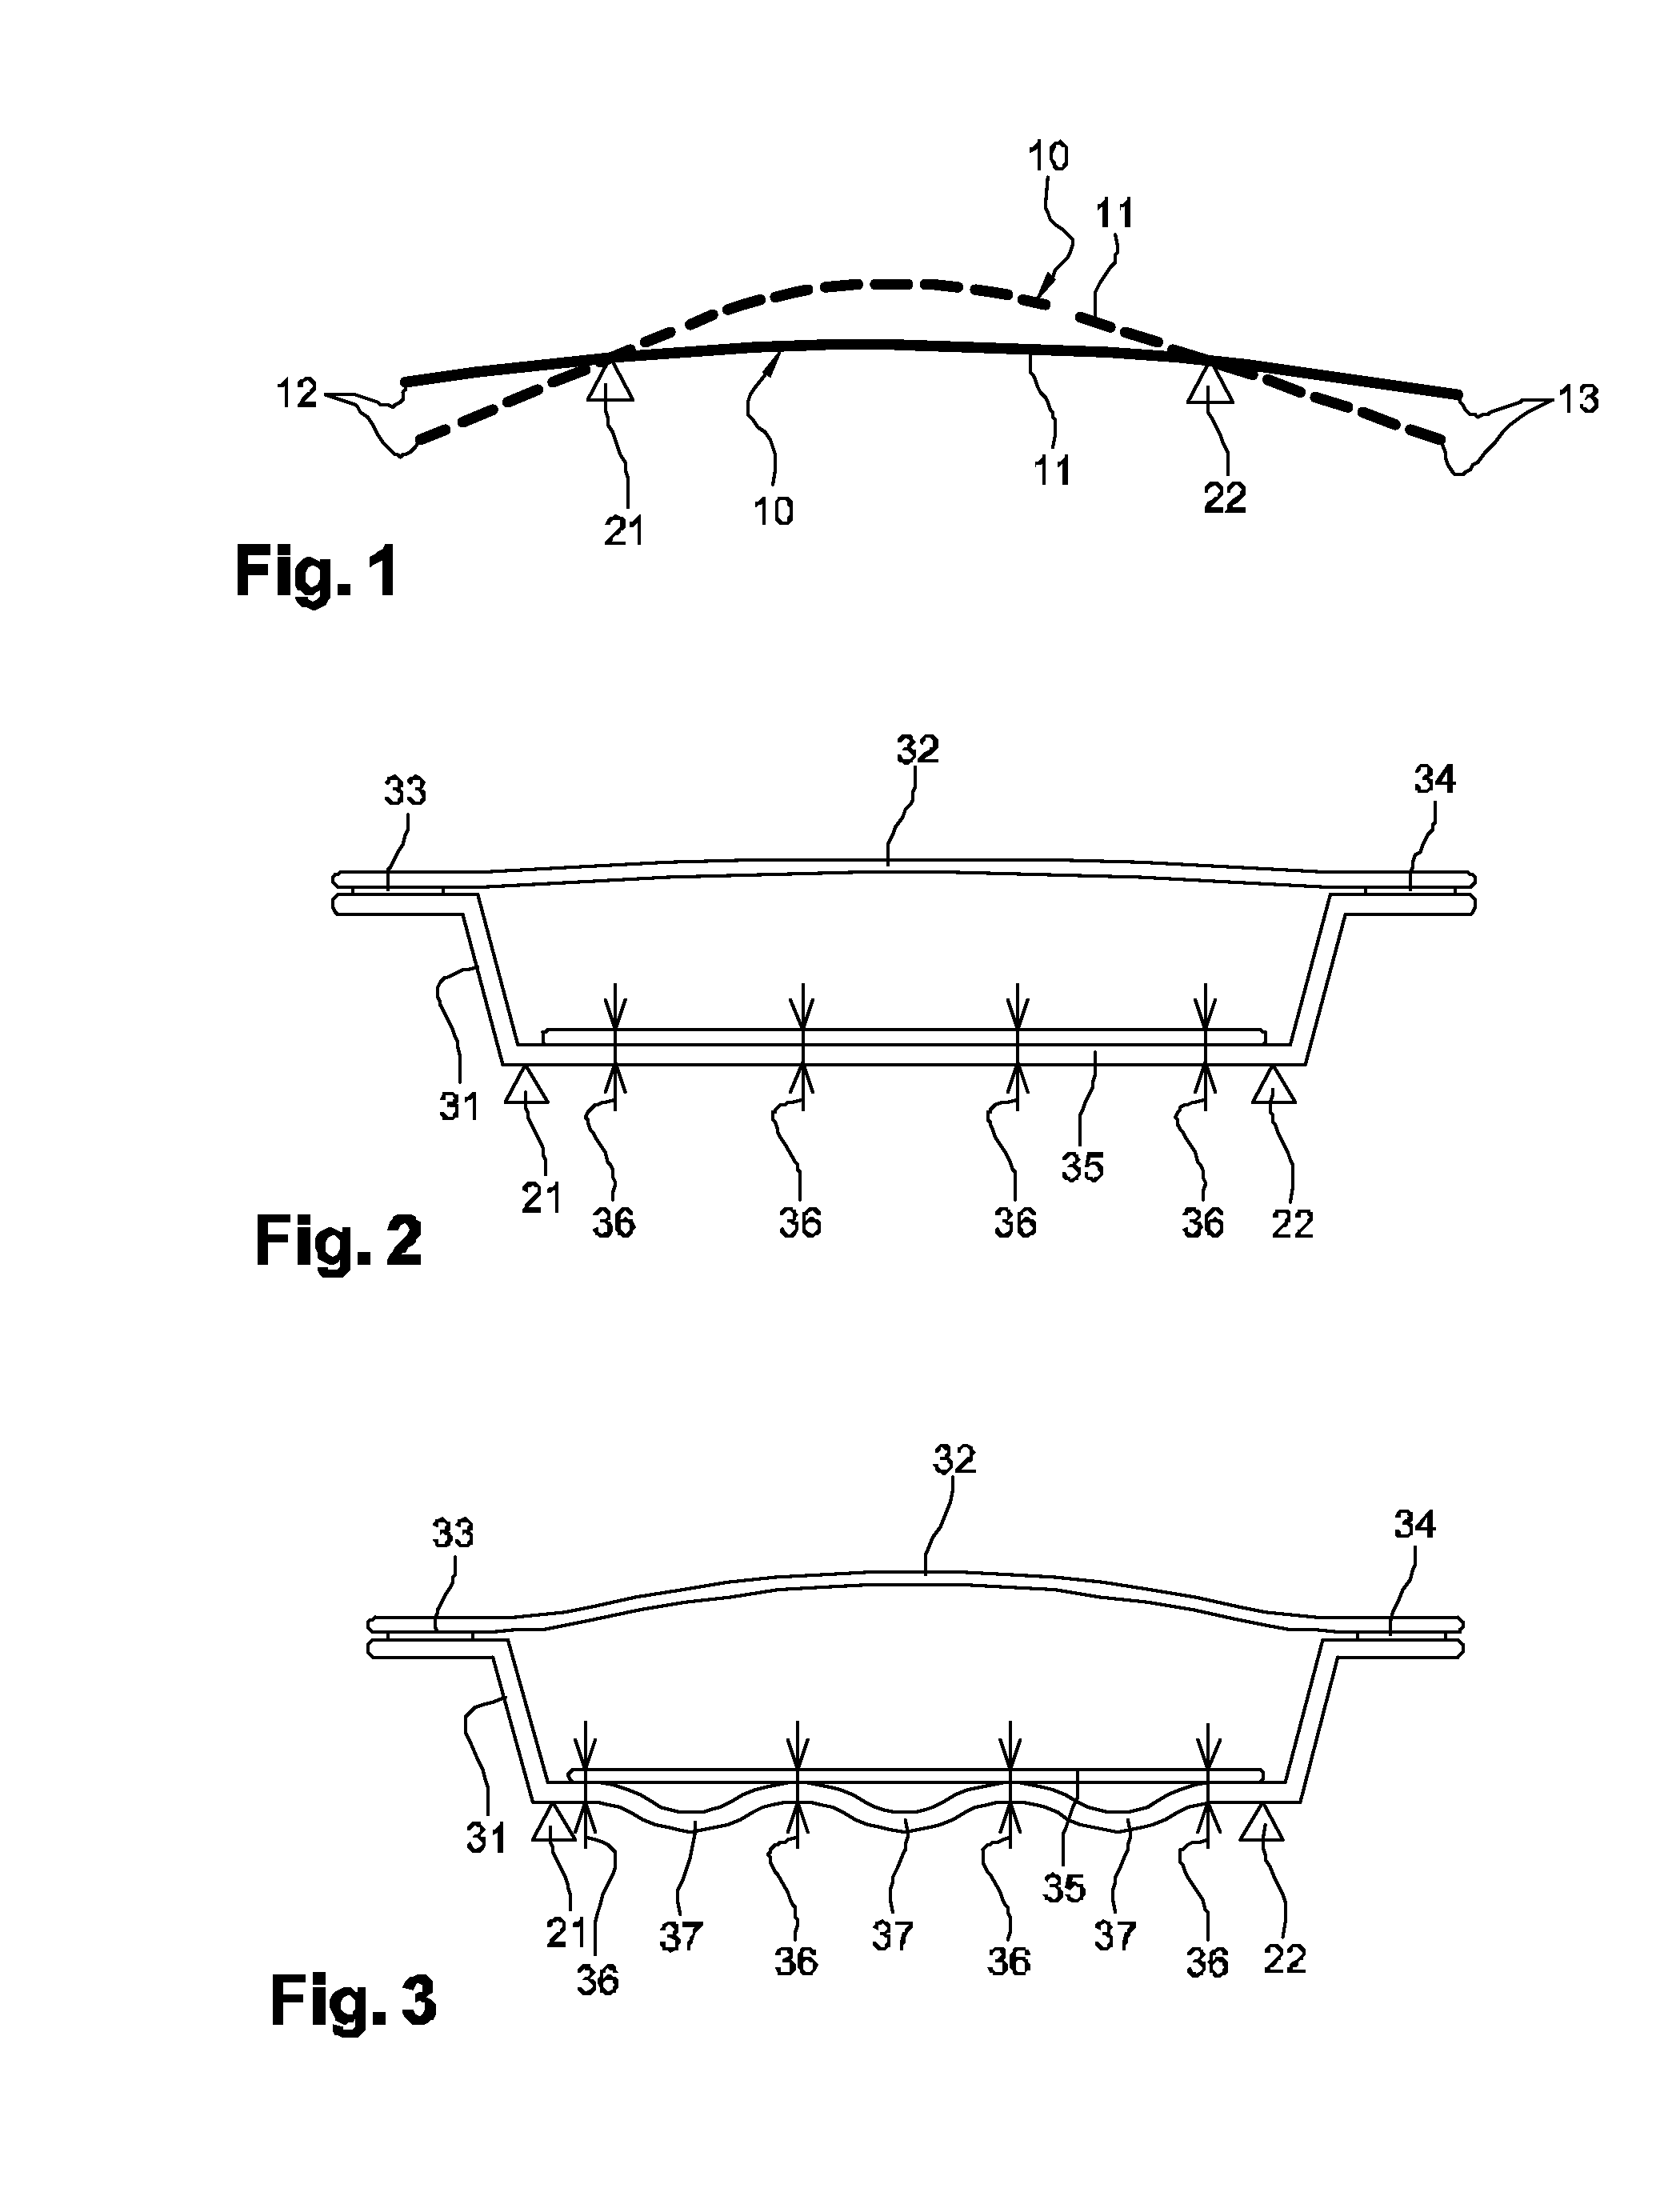 Motor vehicle component that withstands thermal deformation